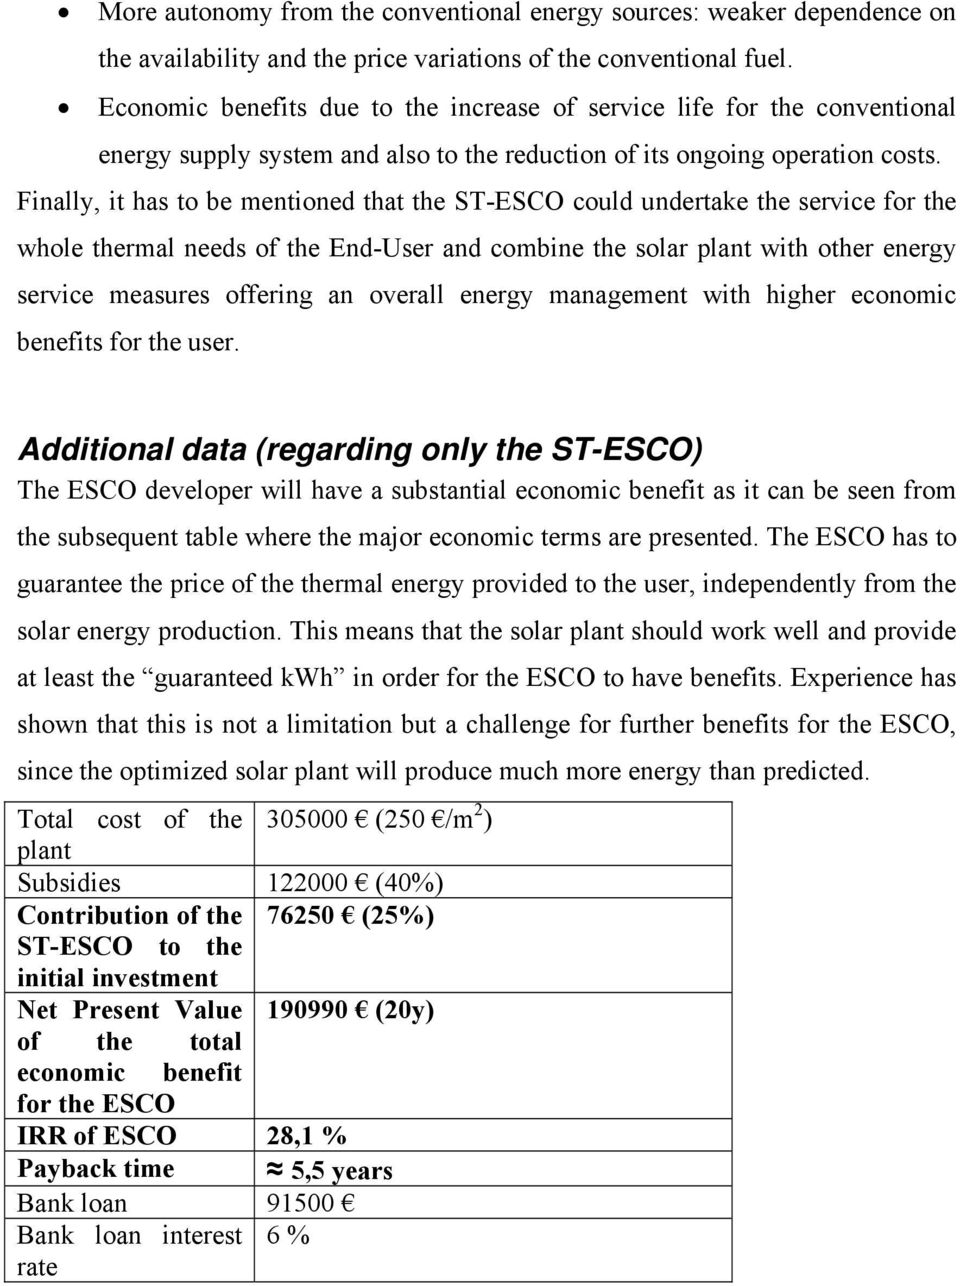 Finally, it has to be mentioned that the ST-ESCO could undertake the service for the whole thermal needs of the End-User and combine the solar plant with other energy service measures offering an